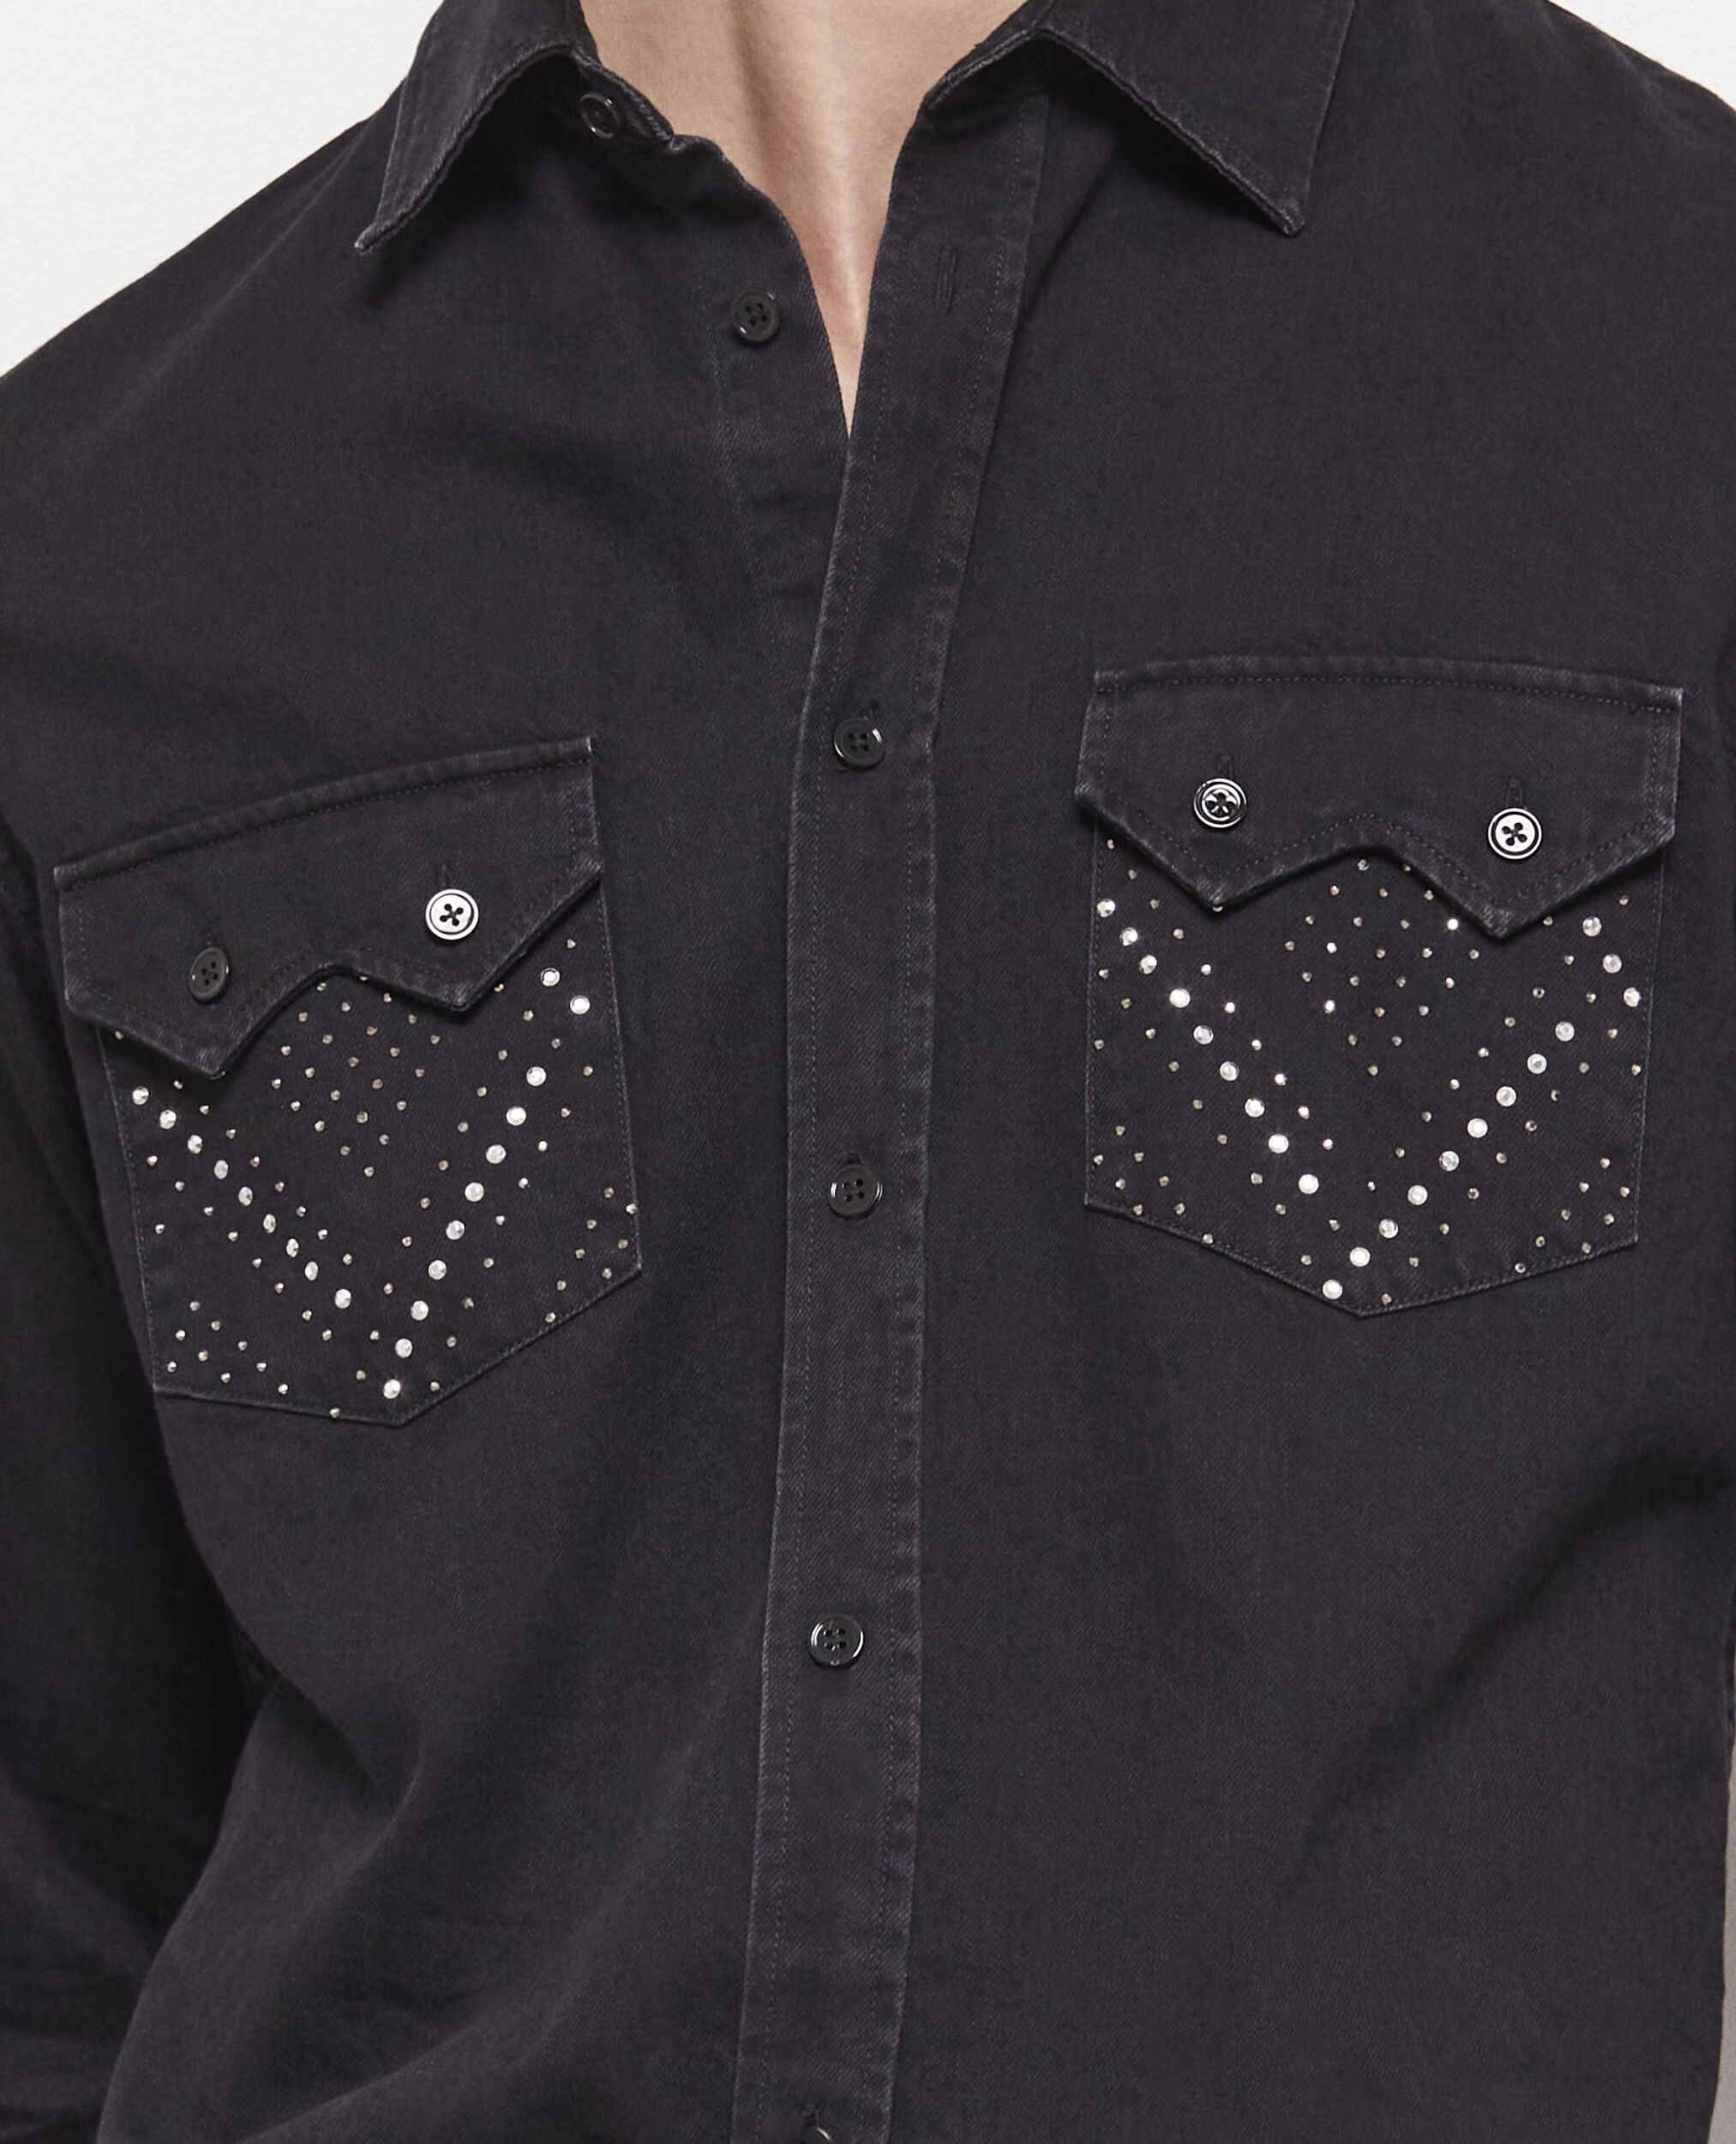 Black studded shirt with classic collar, BLACK WASHED, hi-res image number null